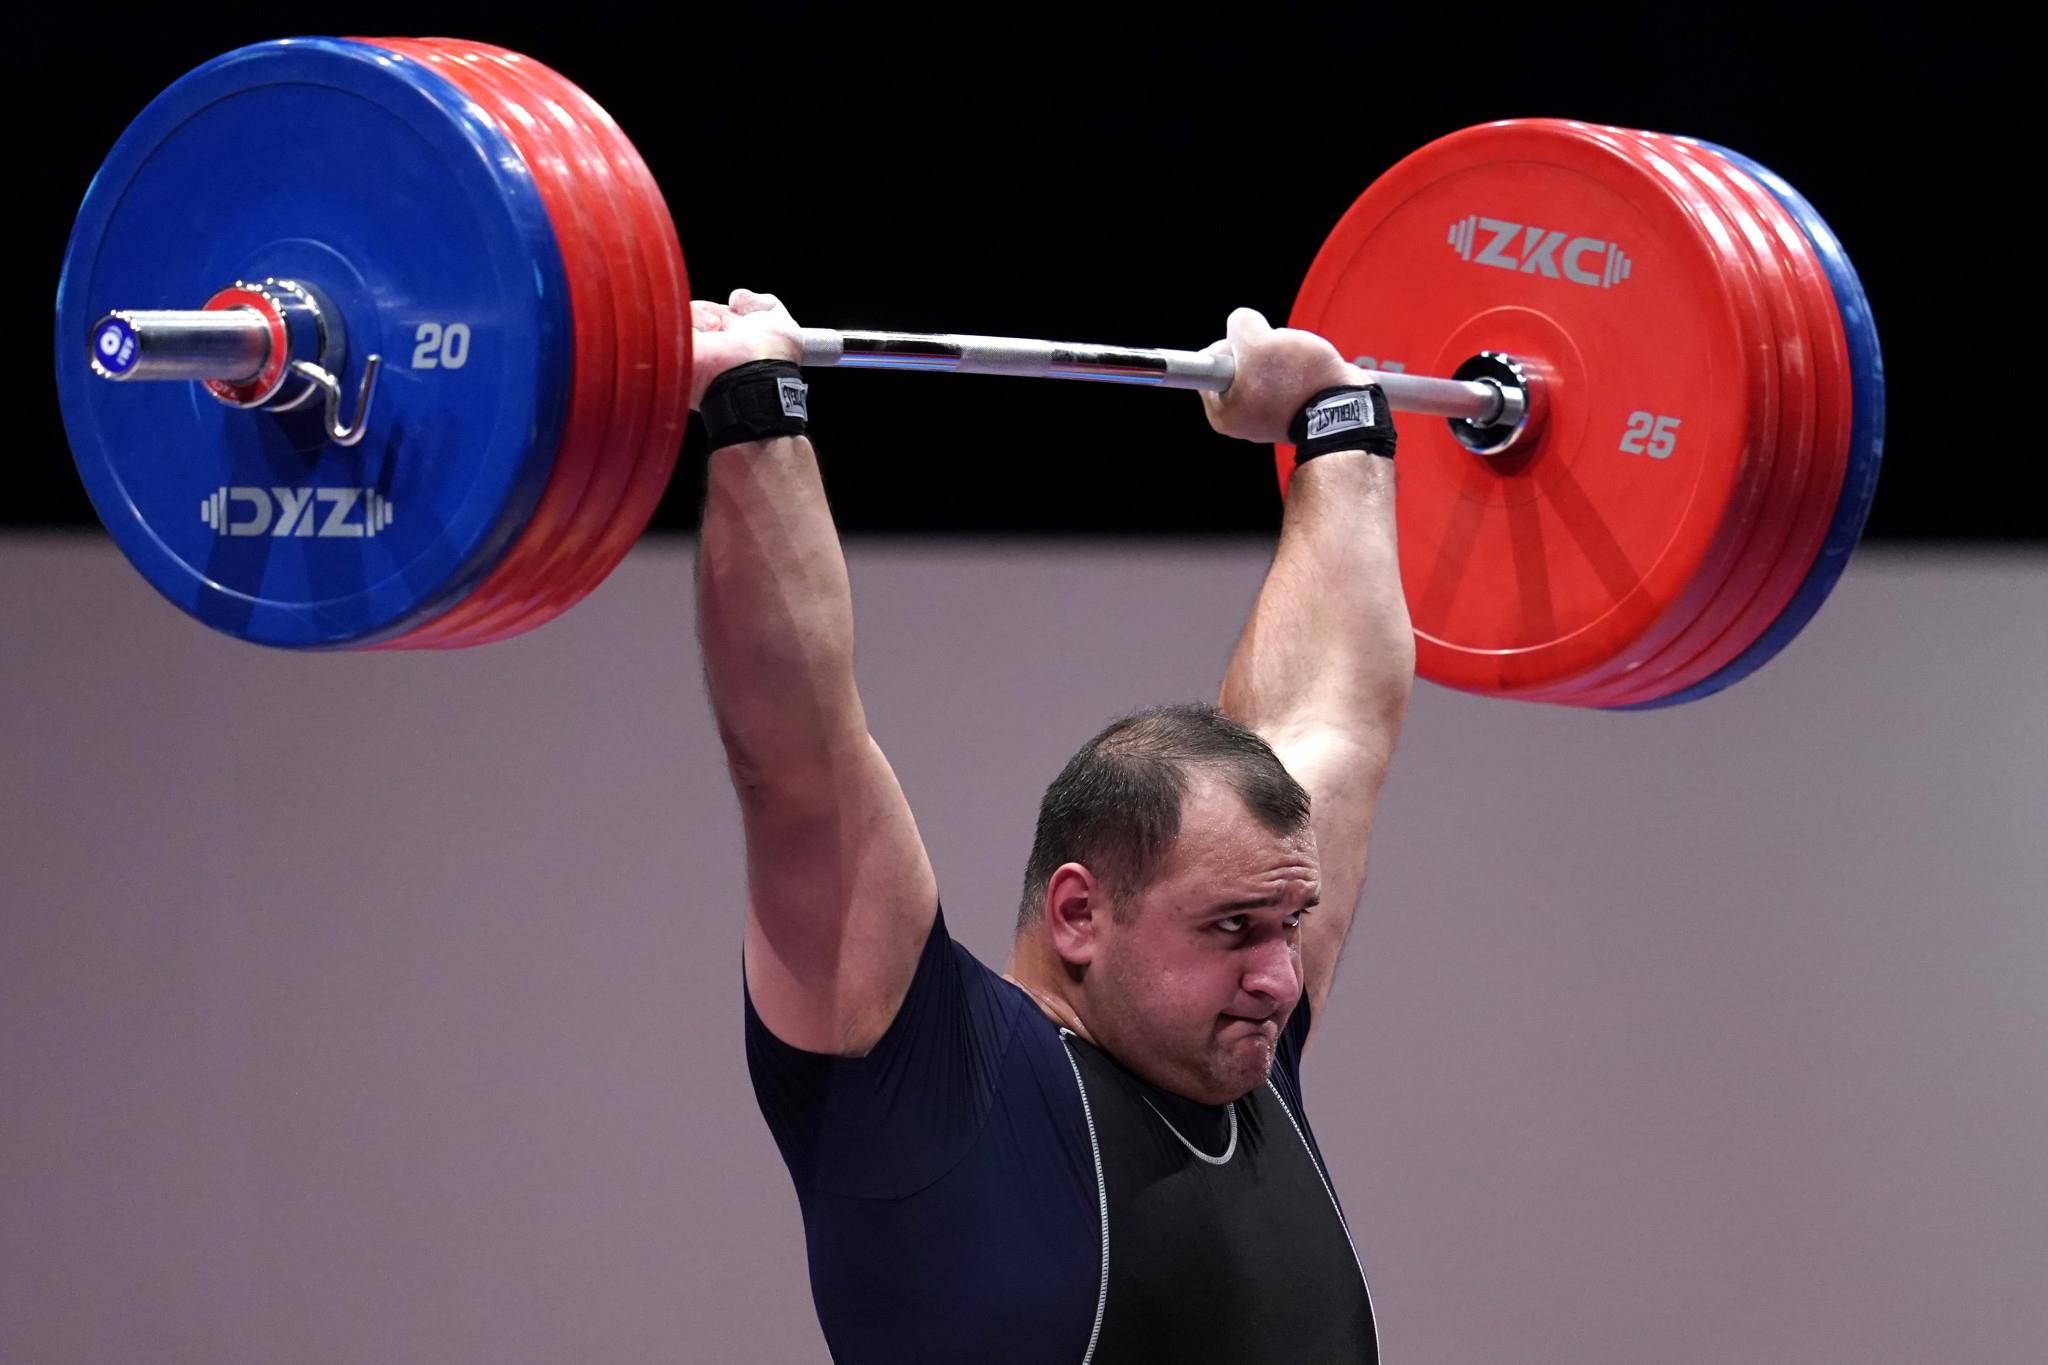 2048x1365 Six more weightlifters banned and three charged but Russia blames Aj&Atilde;&iexcl;n and IWF